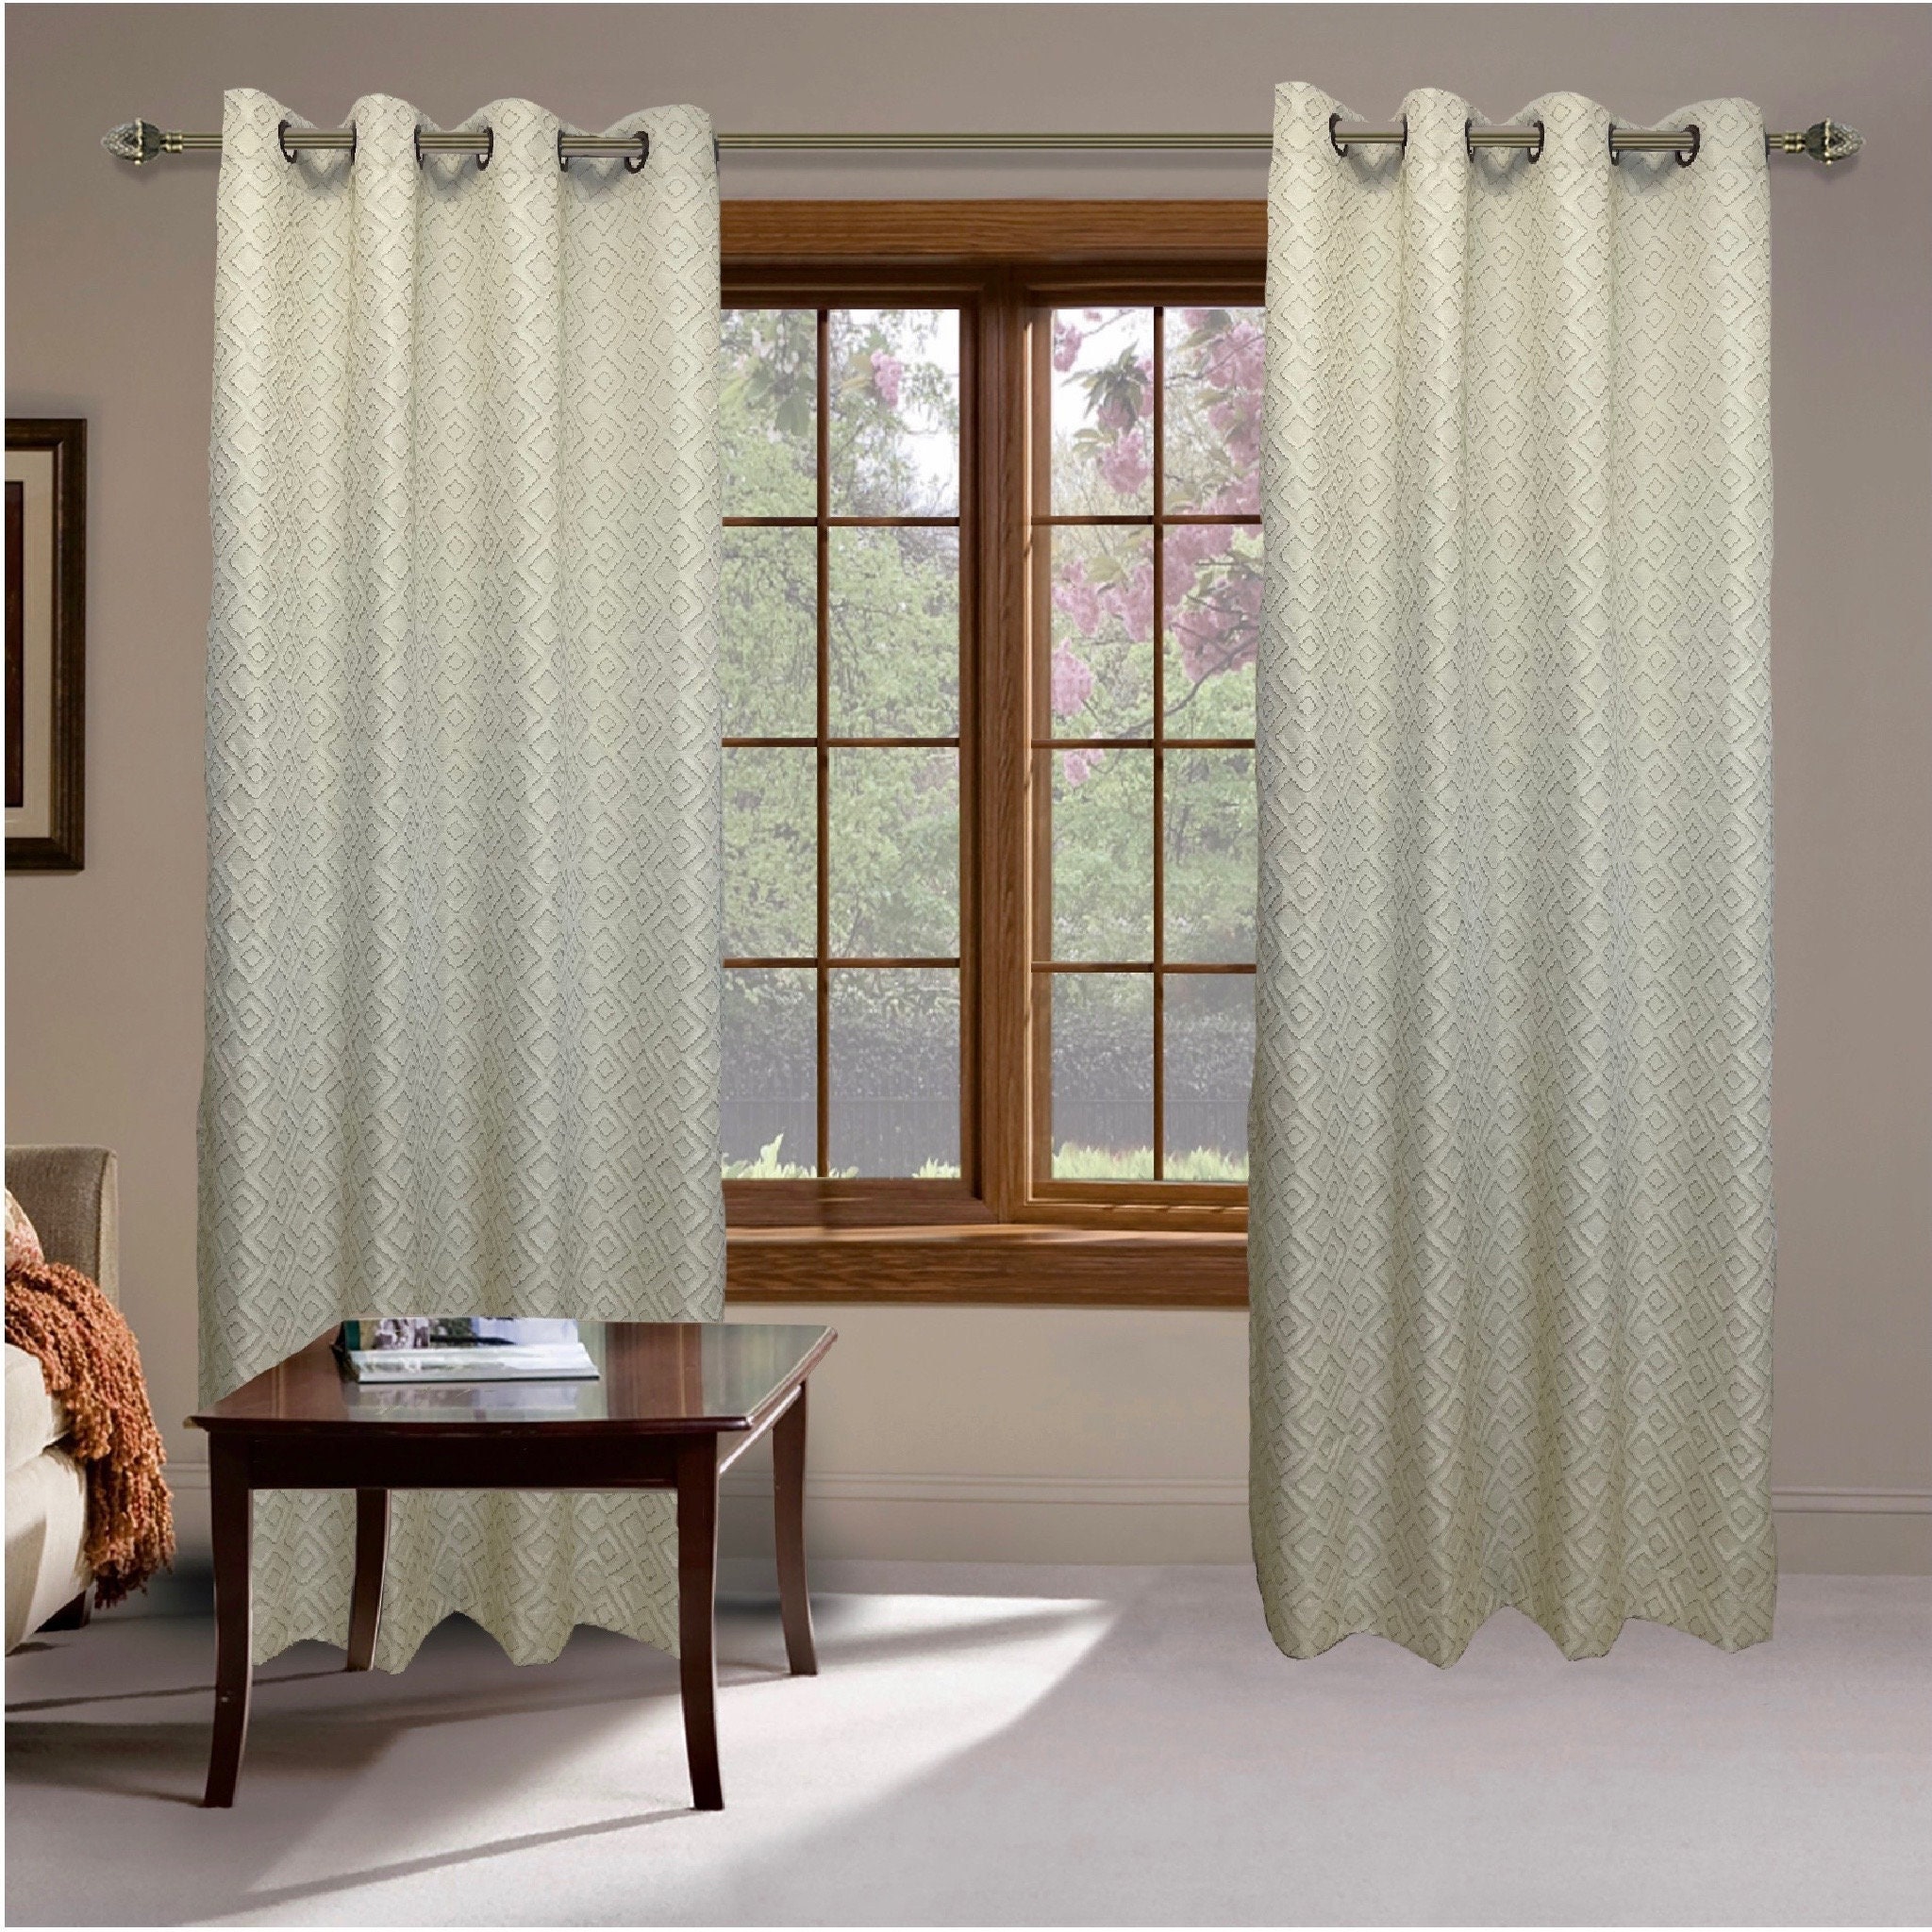  Curtain Spacers (Large) - Curtain Shapers - Drapery Spacers -  Curtains - Curtain Accessories - Pleats : Home & Kitchen